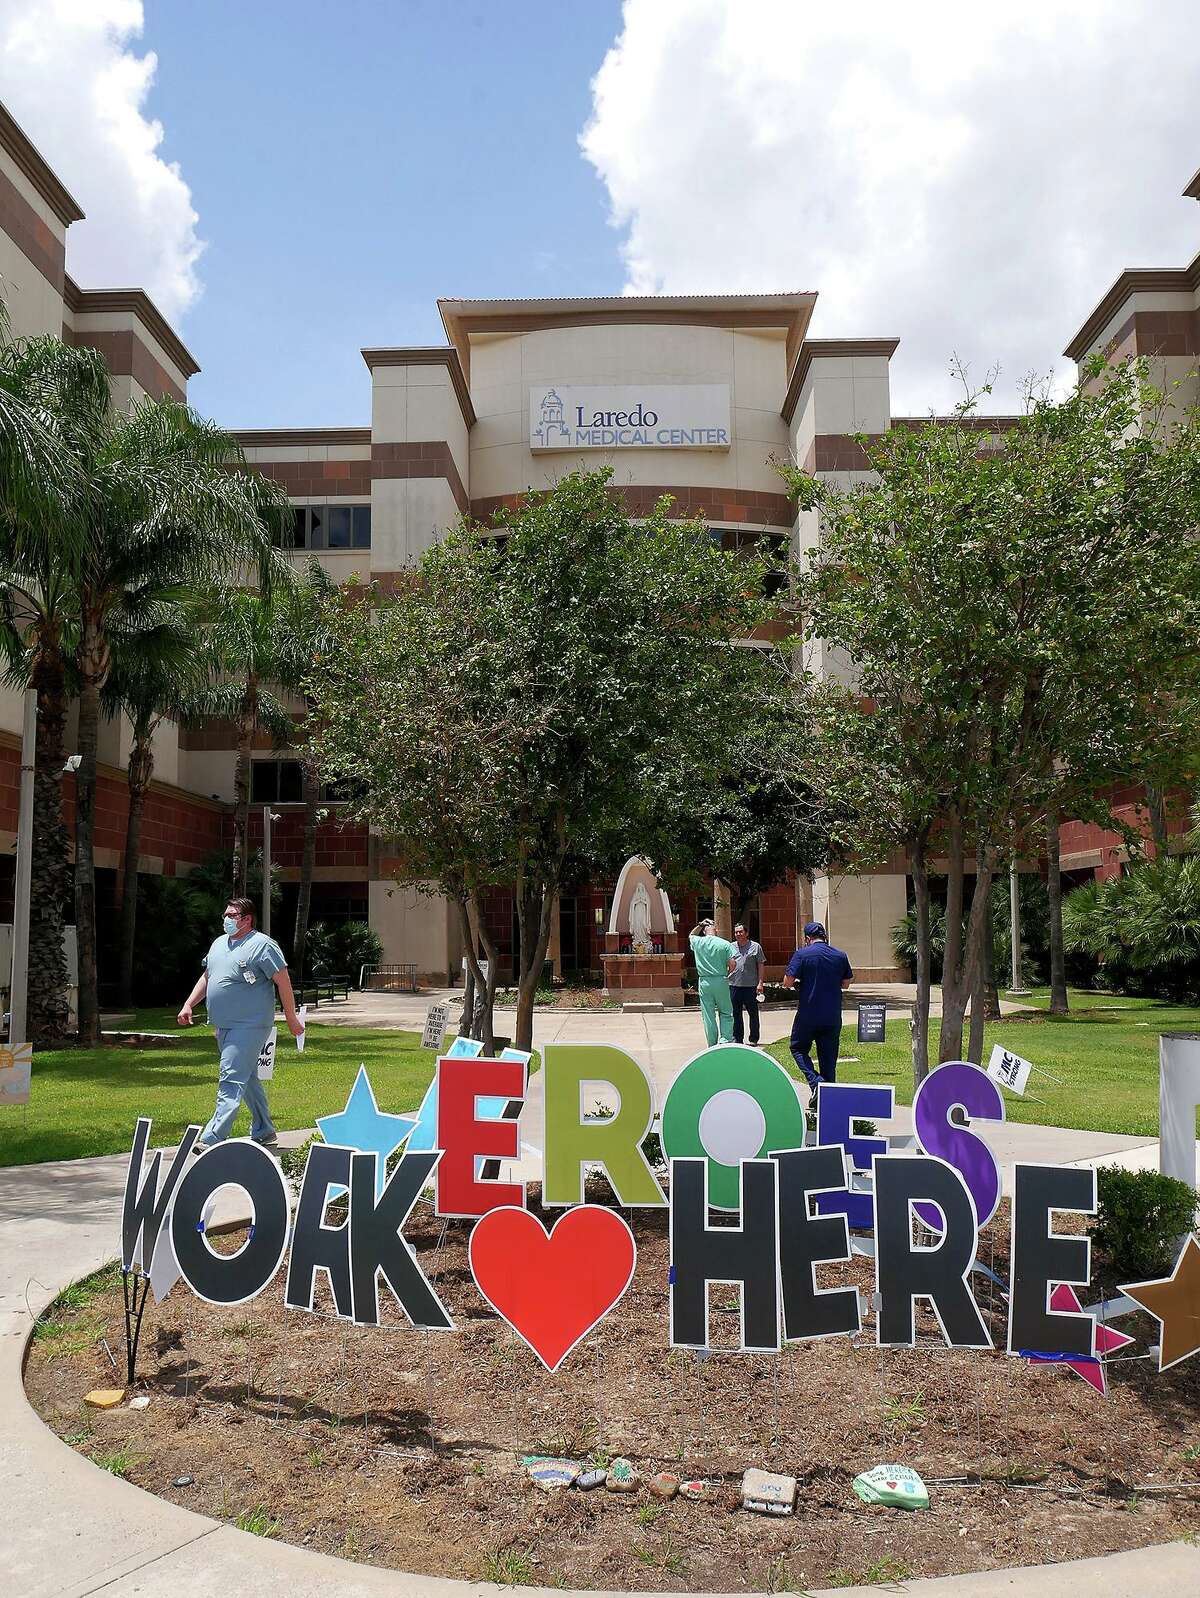 A “Heroes Work Here” sign sits outside Laredo Medical Center on May 11, 2020 as workers walk in and out of the facility. Recently, some recently departed staff discussed why many are leaving the area in favor of state positions, which they describe as having more pay and less stress.